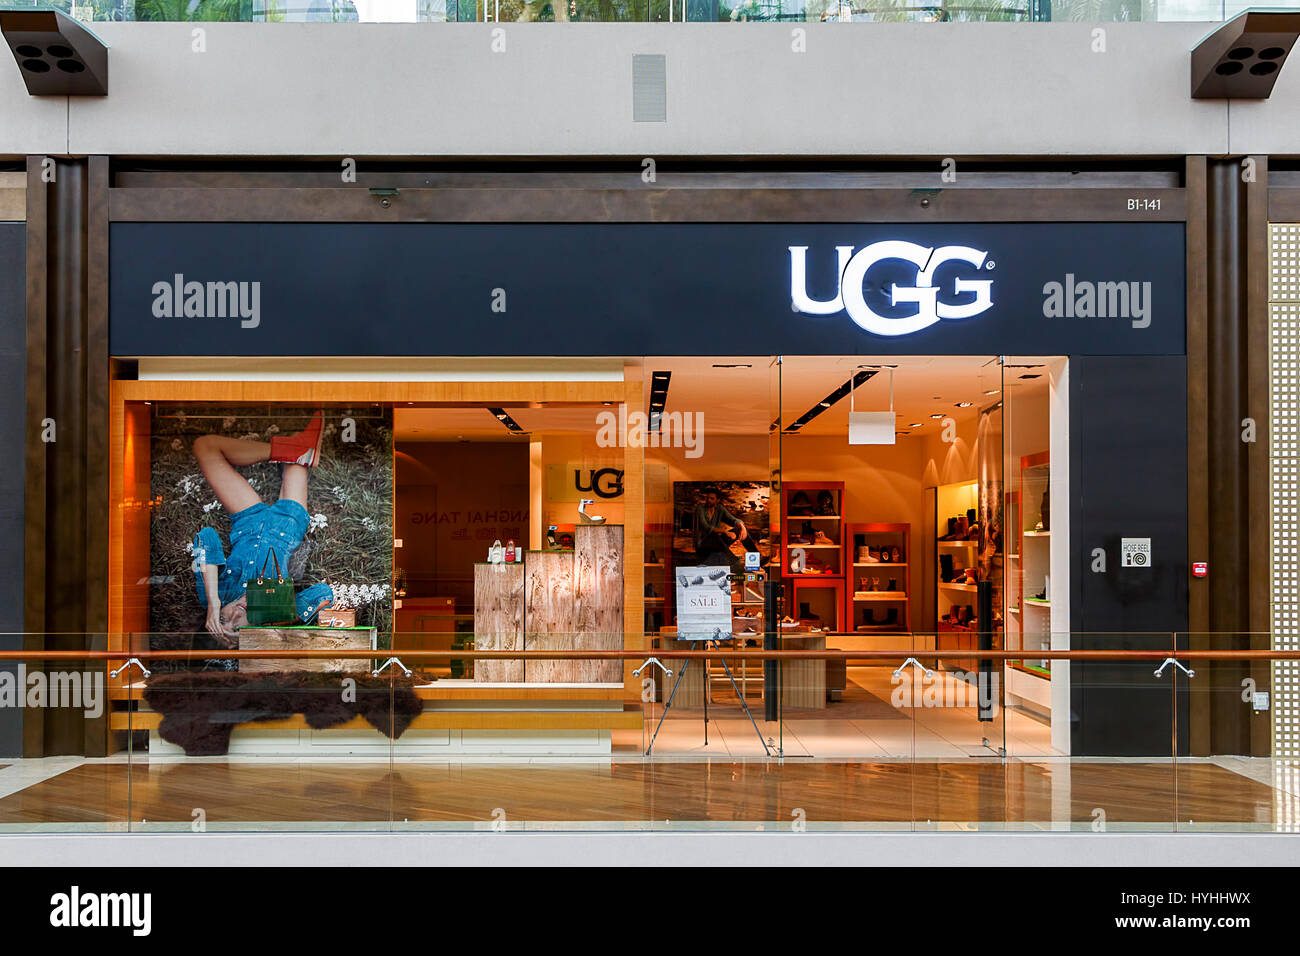 ugg store outlet mall